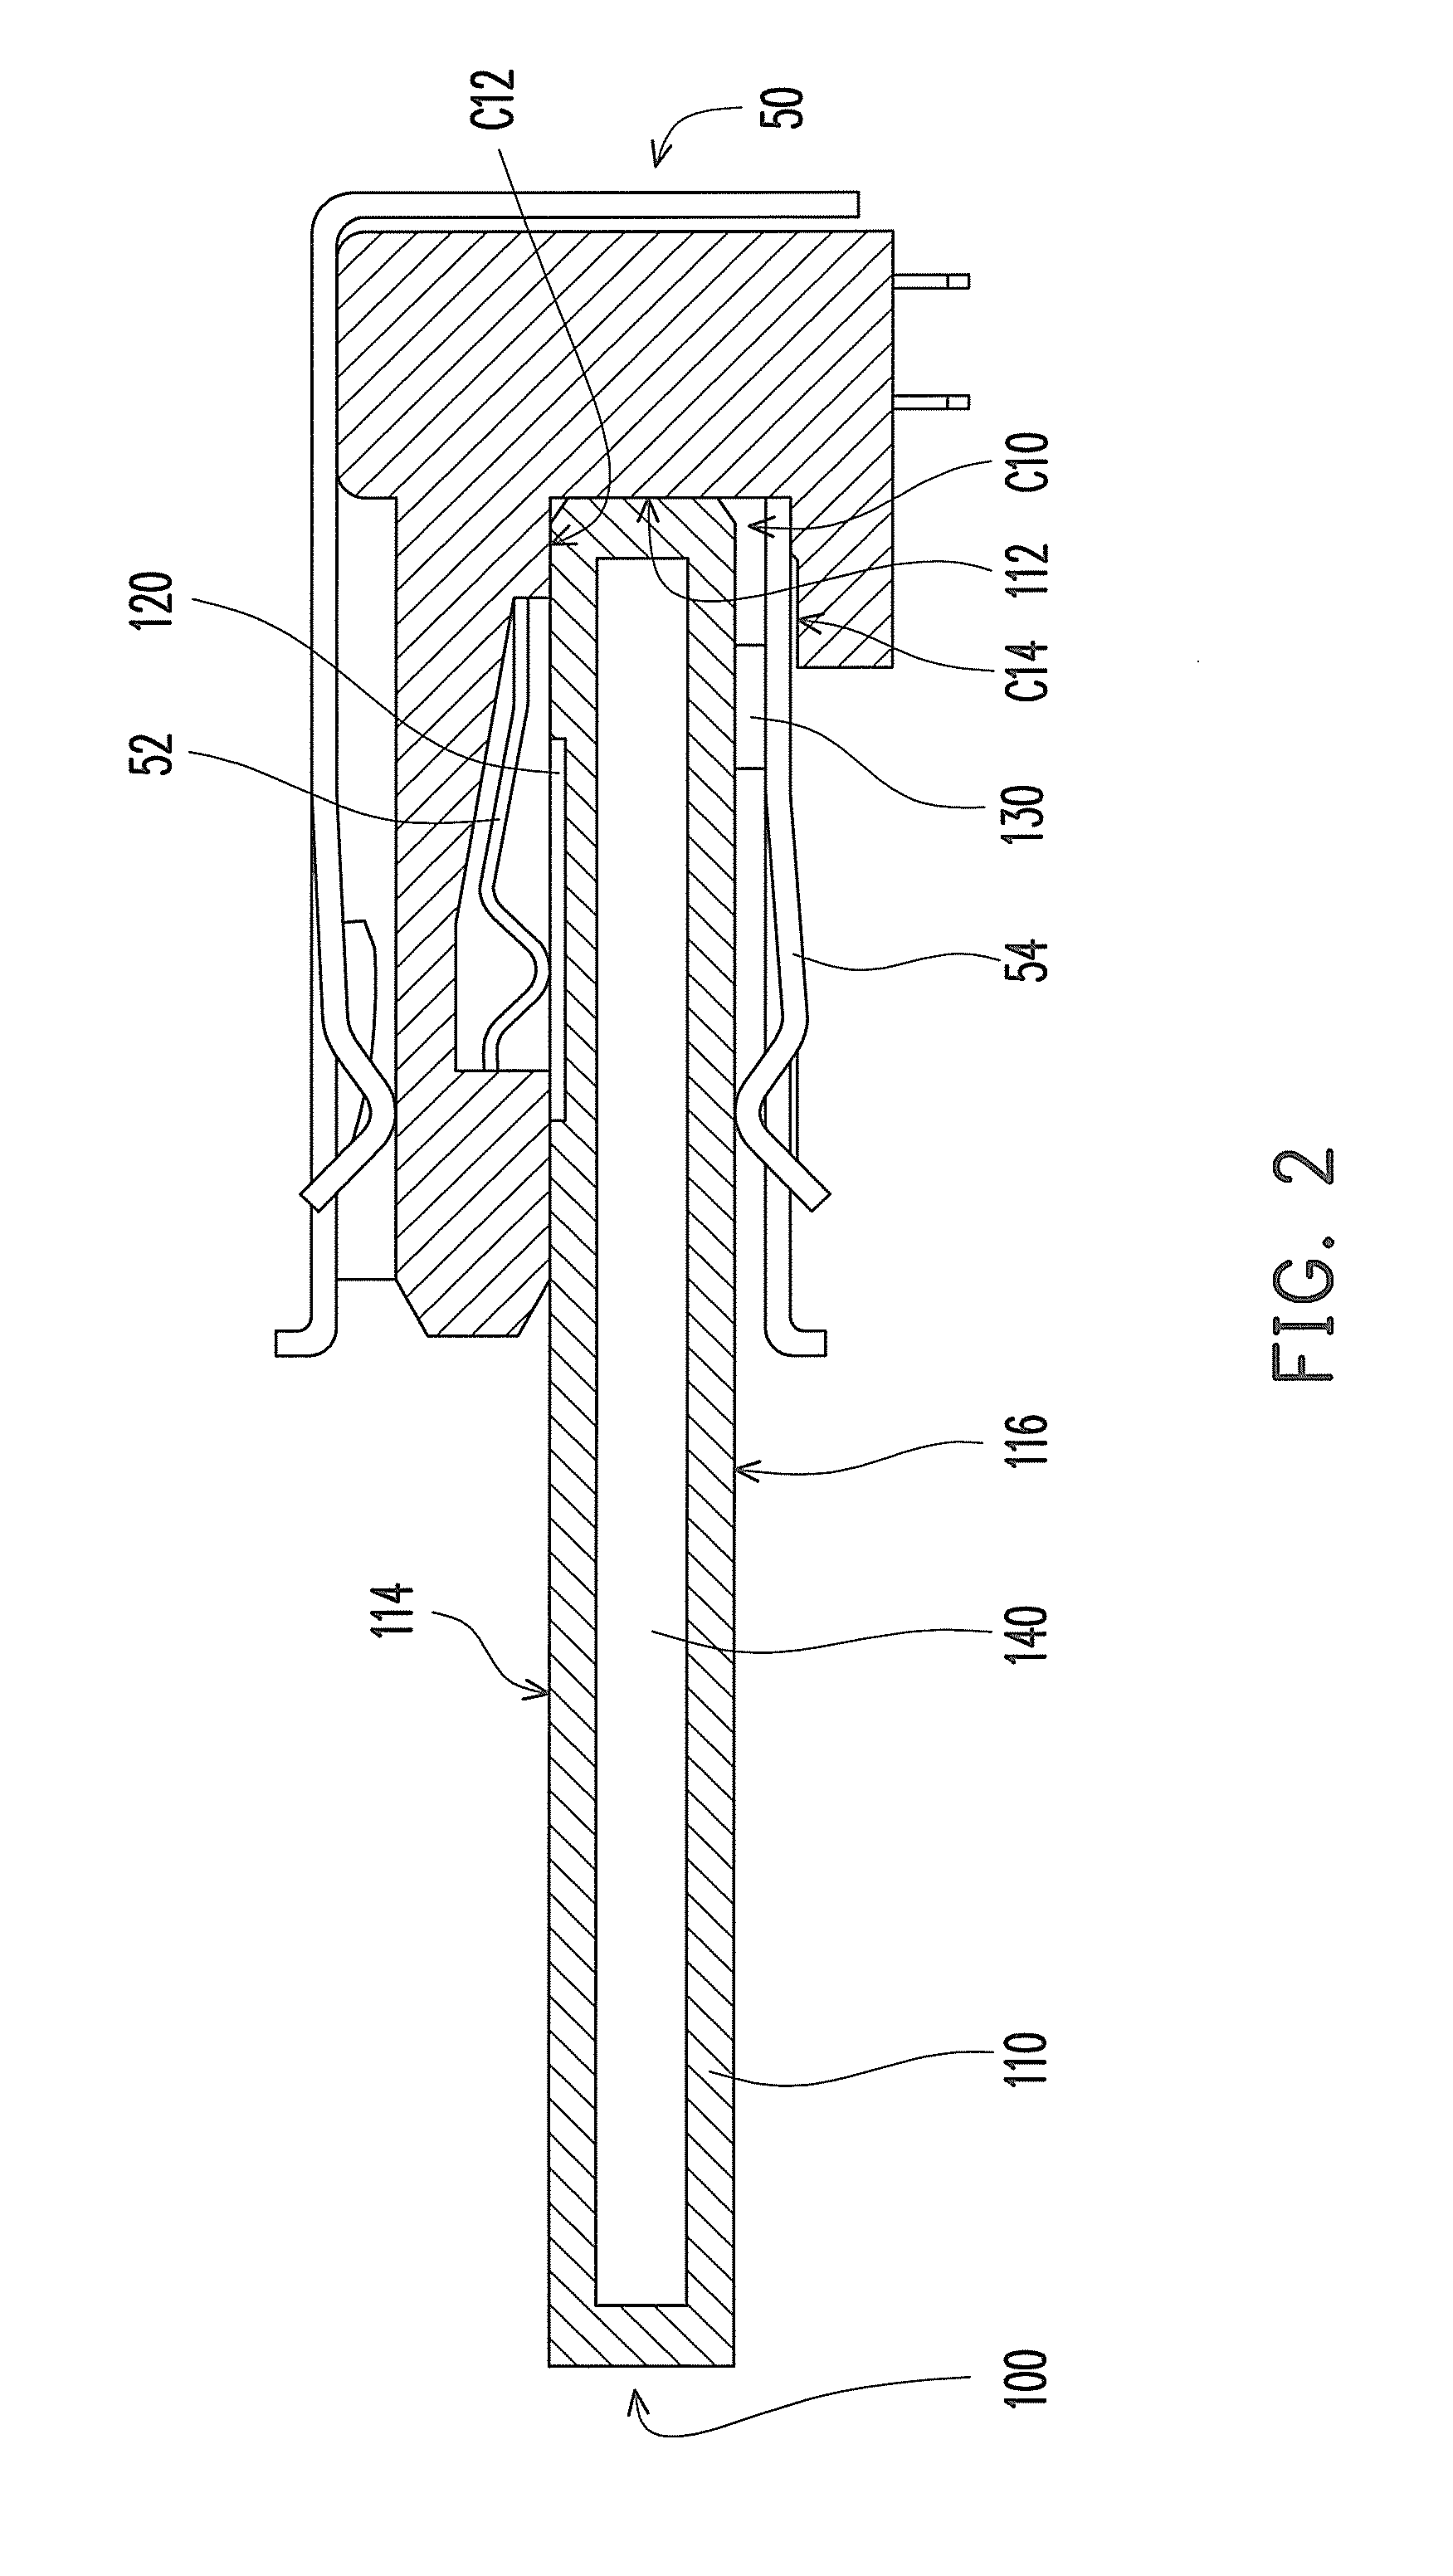 Electronic device, adapter and receptacle